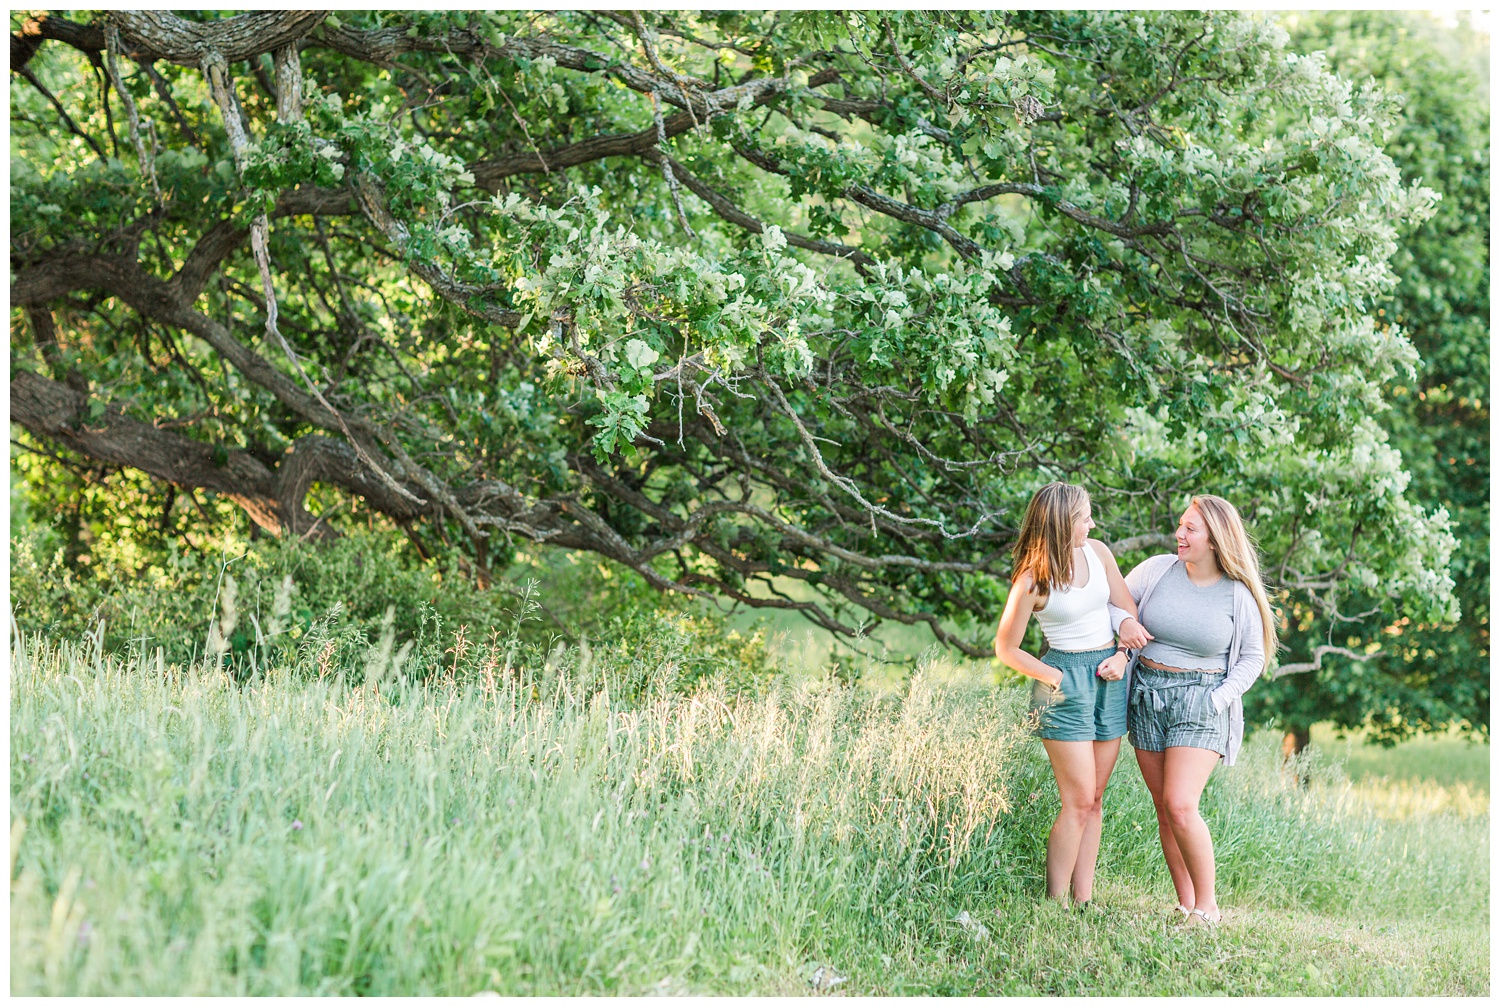 Senior girls best friends BFFs embrace laughing at each other in a grassy field on a rural Iowa farm | CB Studio